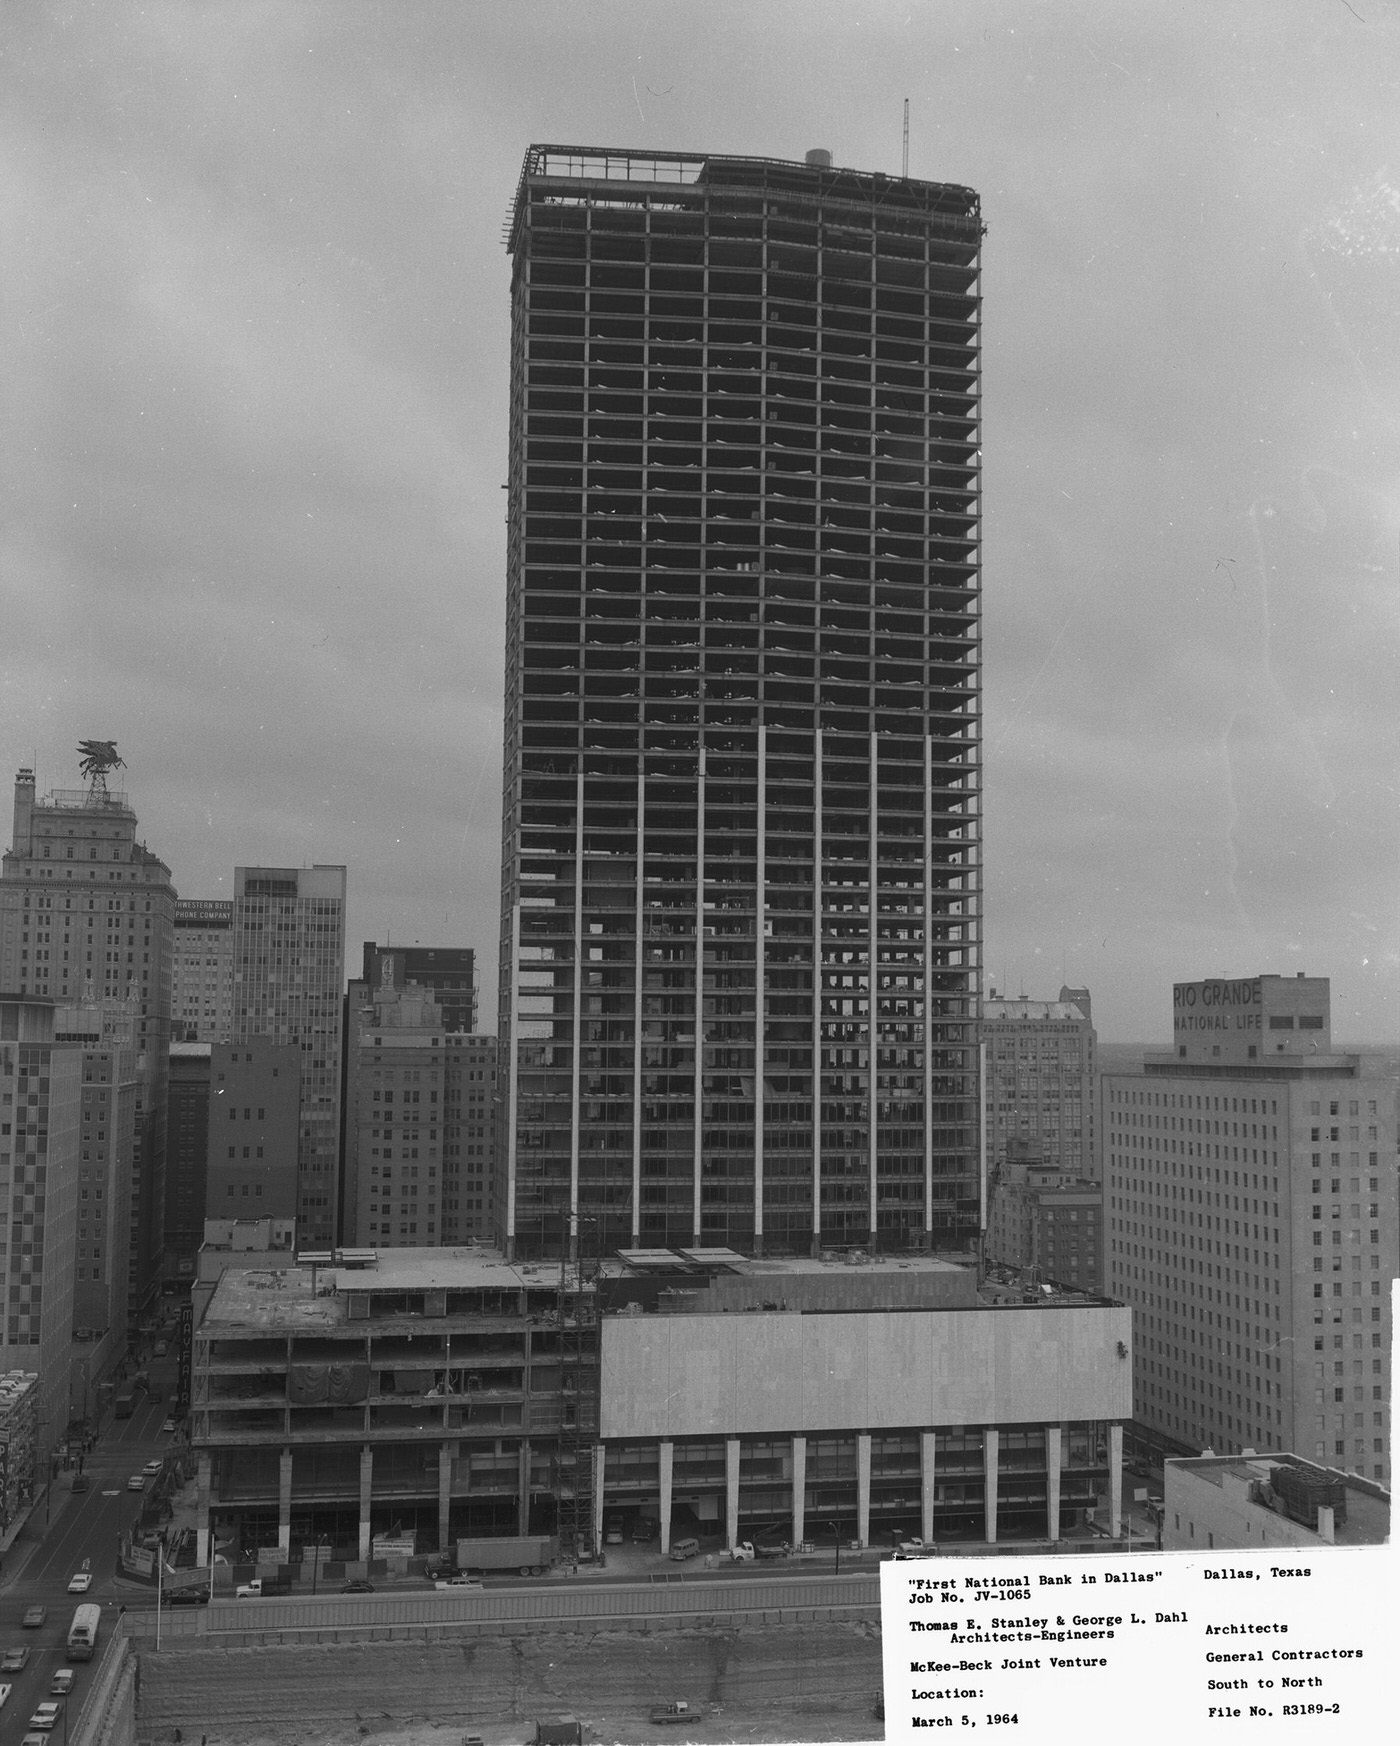 Construction of the First National Bank building, 1963